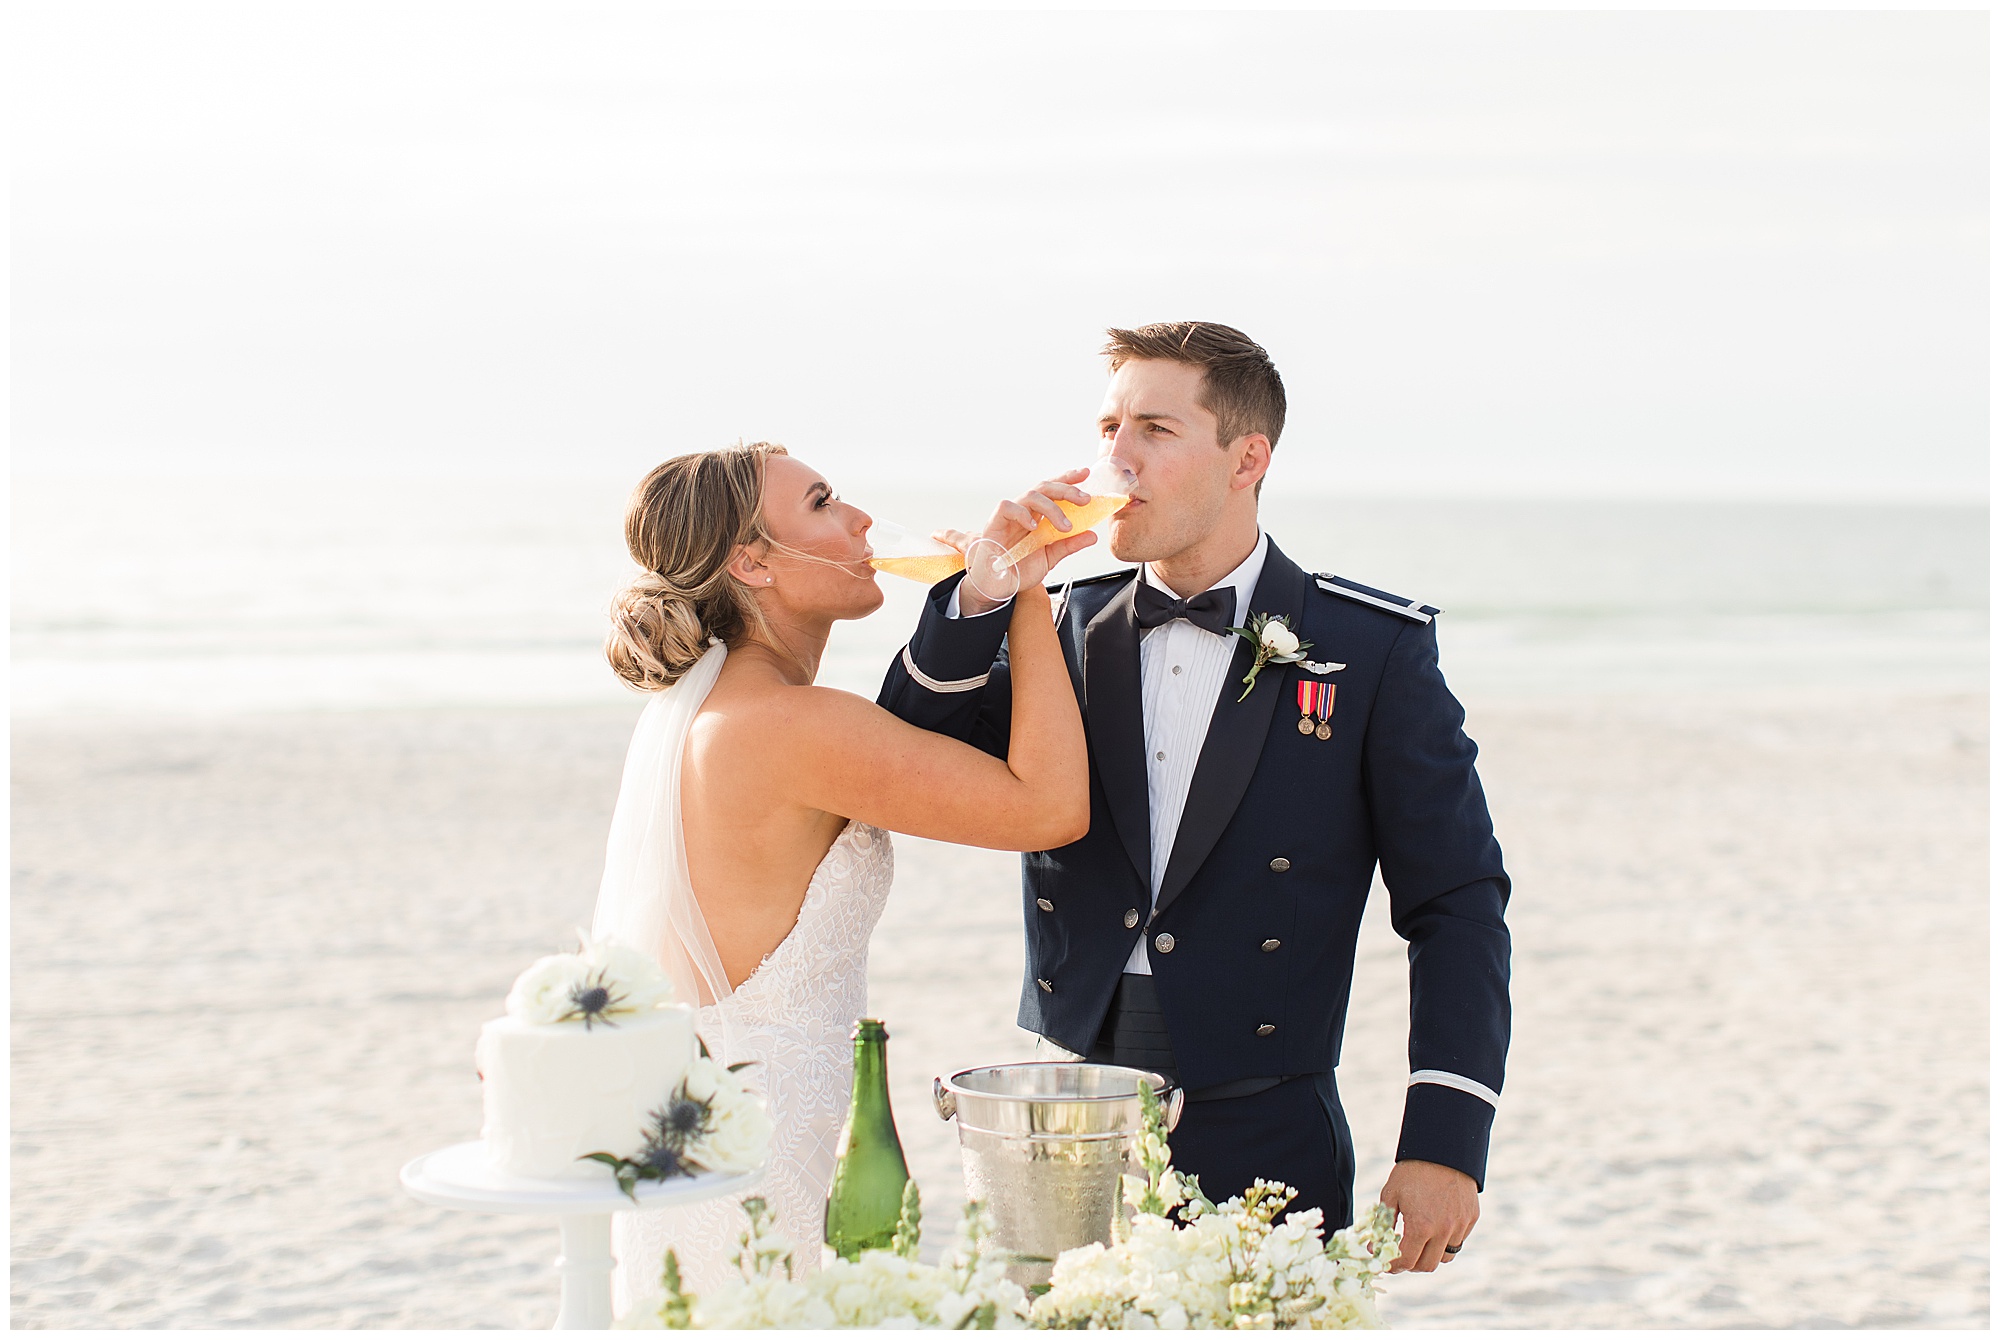 Jace & Anton, Pass-A-Grille Beach, St. Petersburg Florida wedding, Kelley Stinson Photography, beach wedding, bride and groom, champagne toast